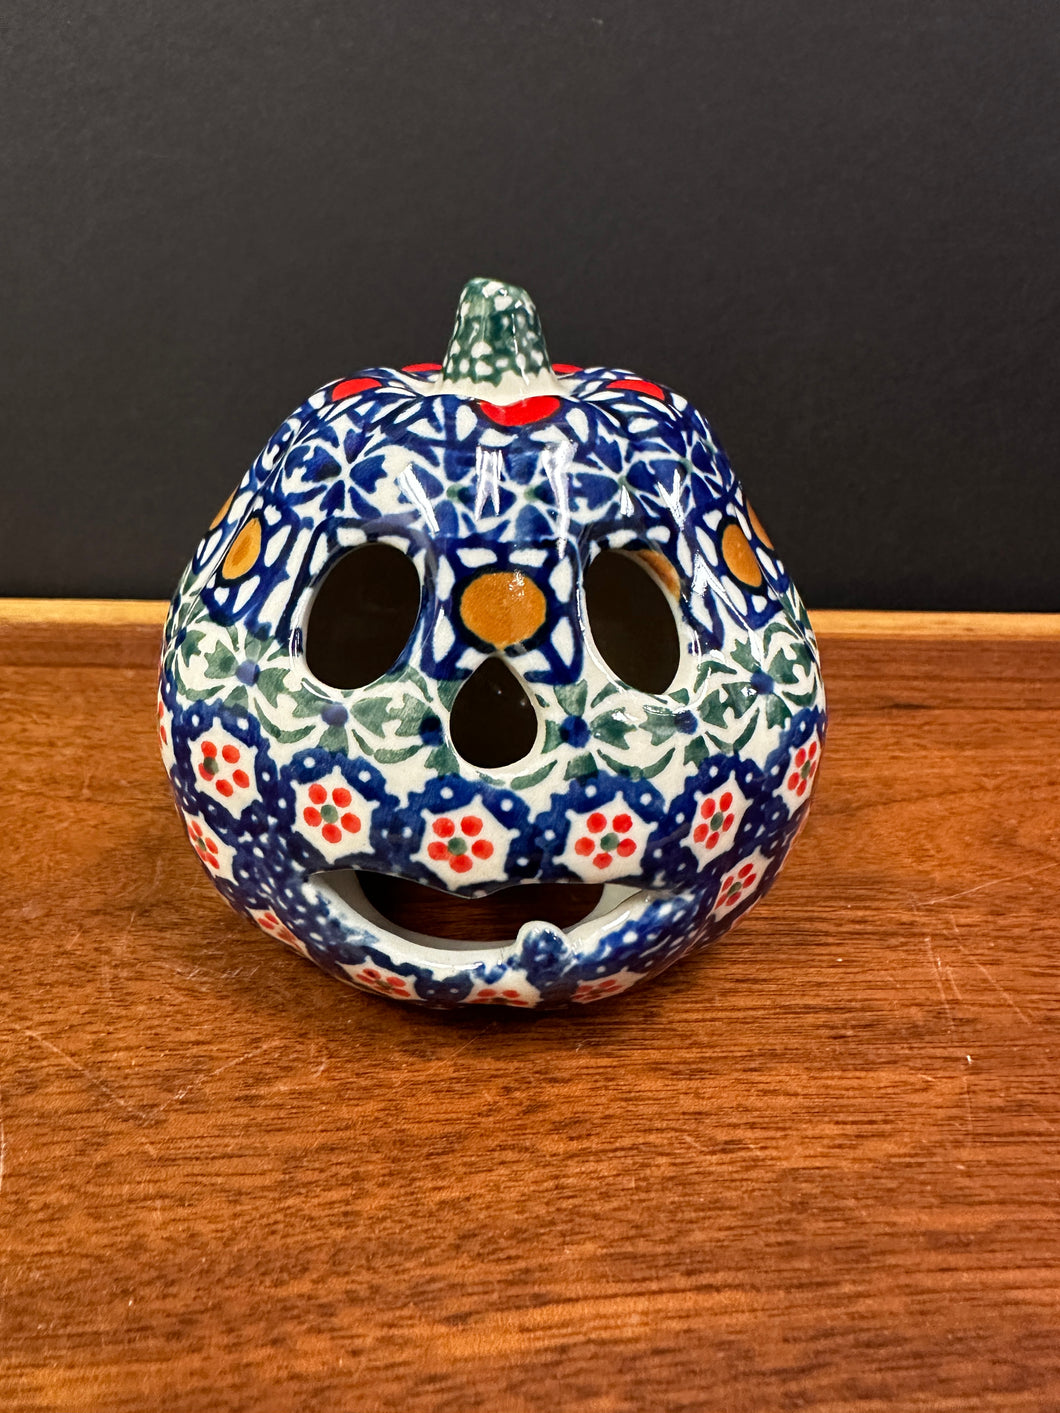 Jack O' Lantern, Minis by Andy - Stained Glass